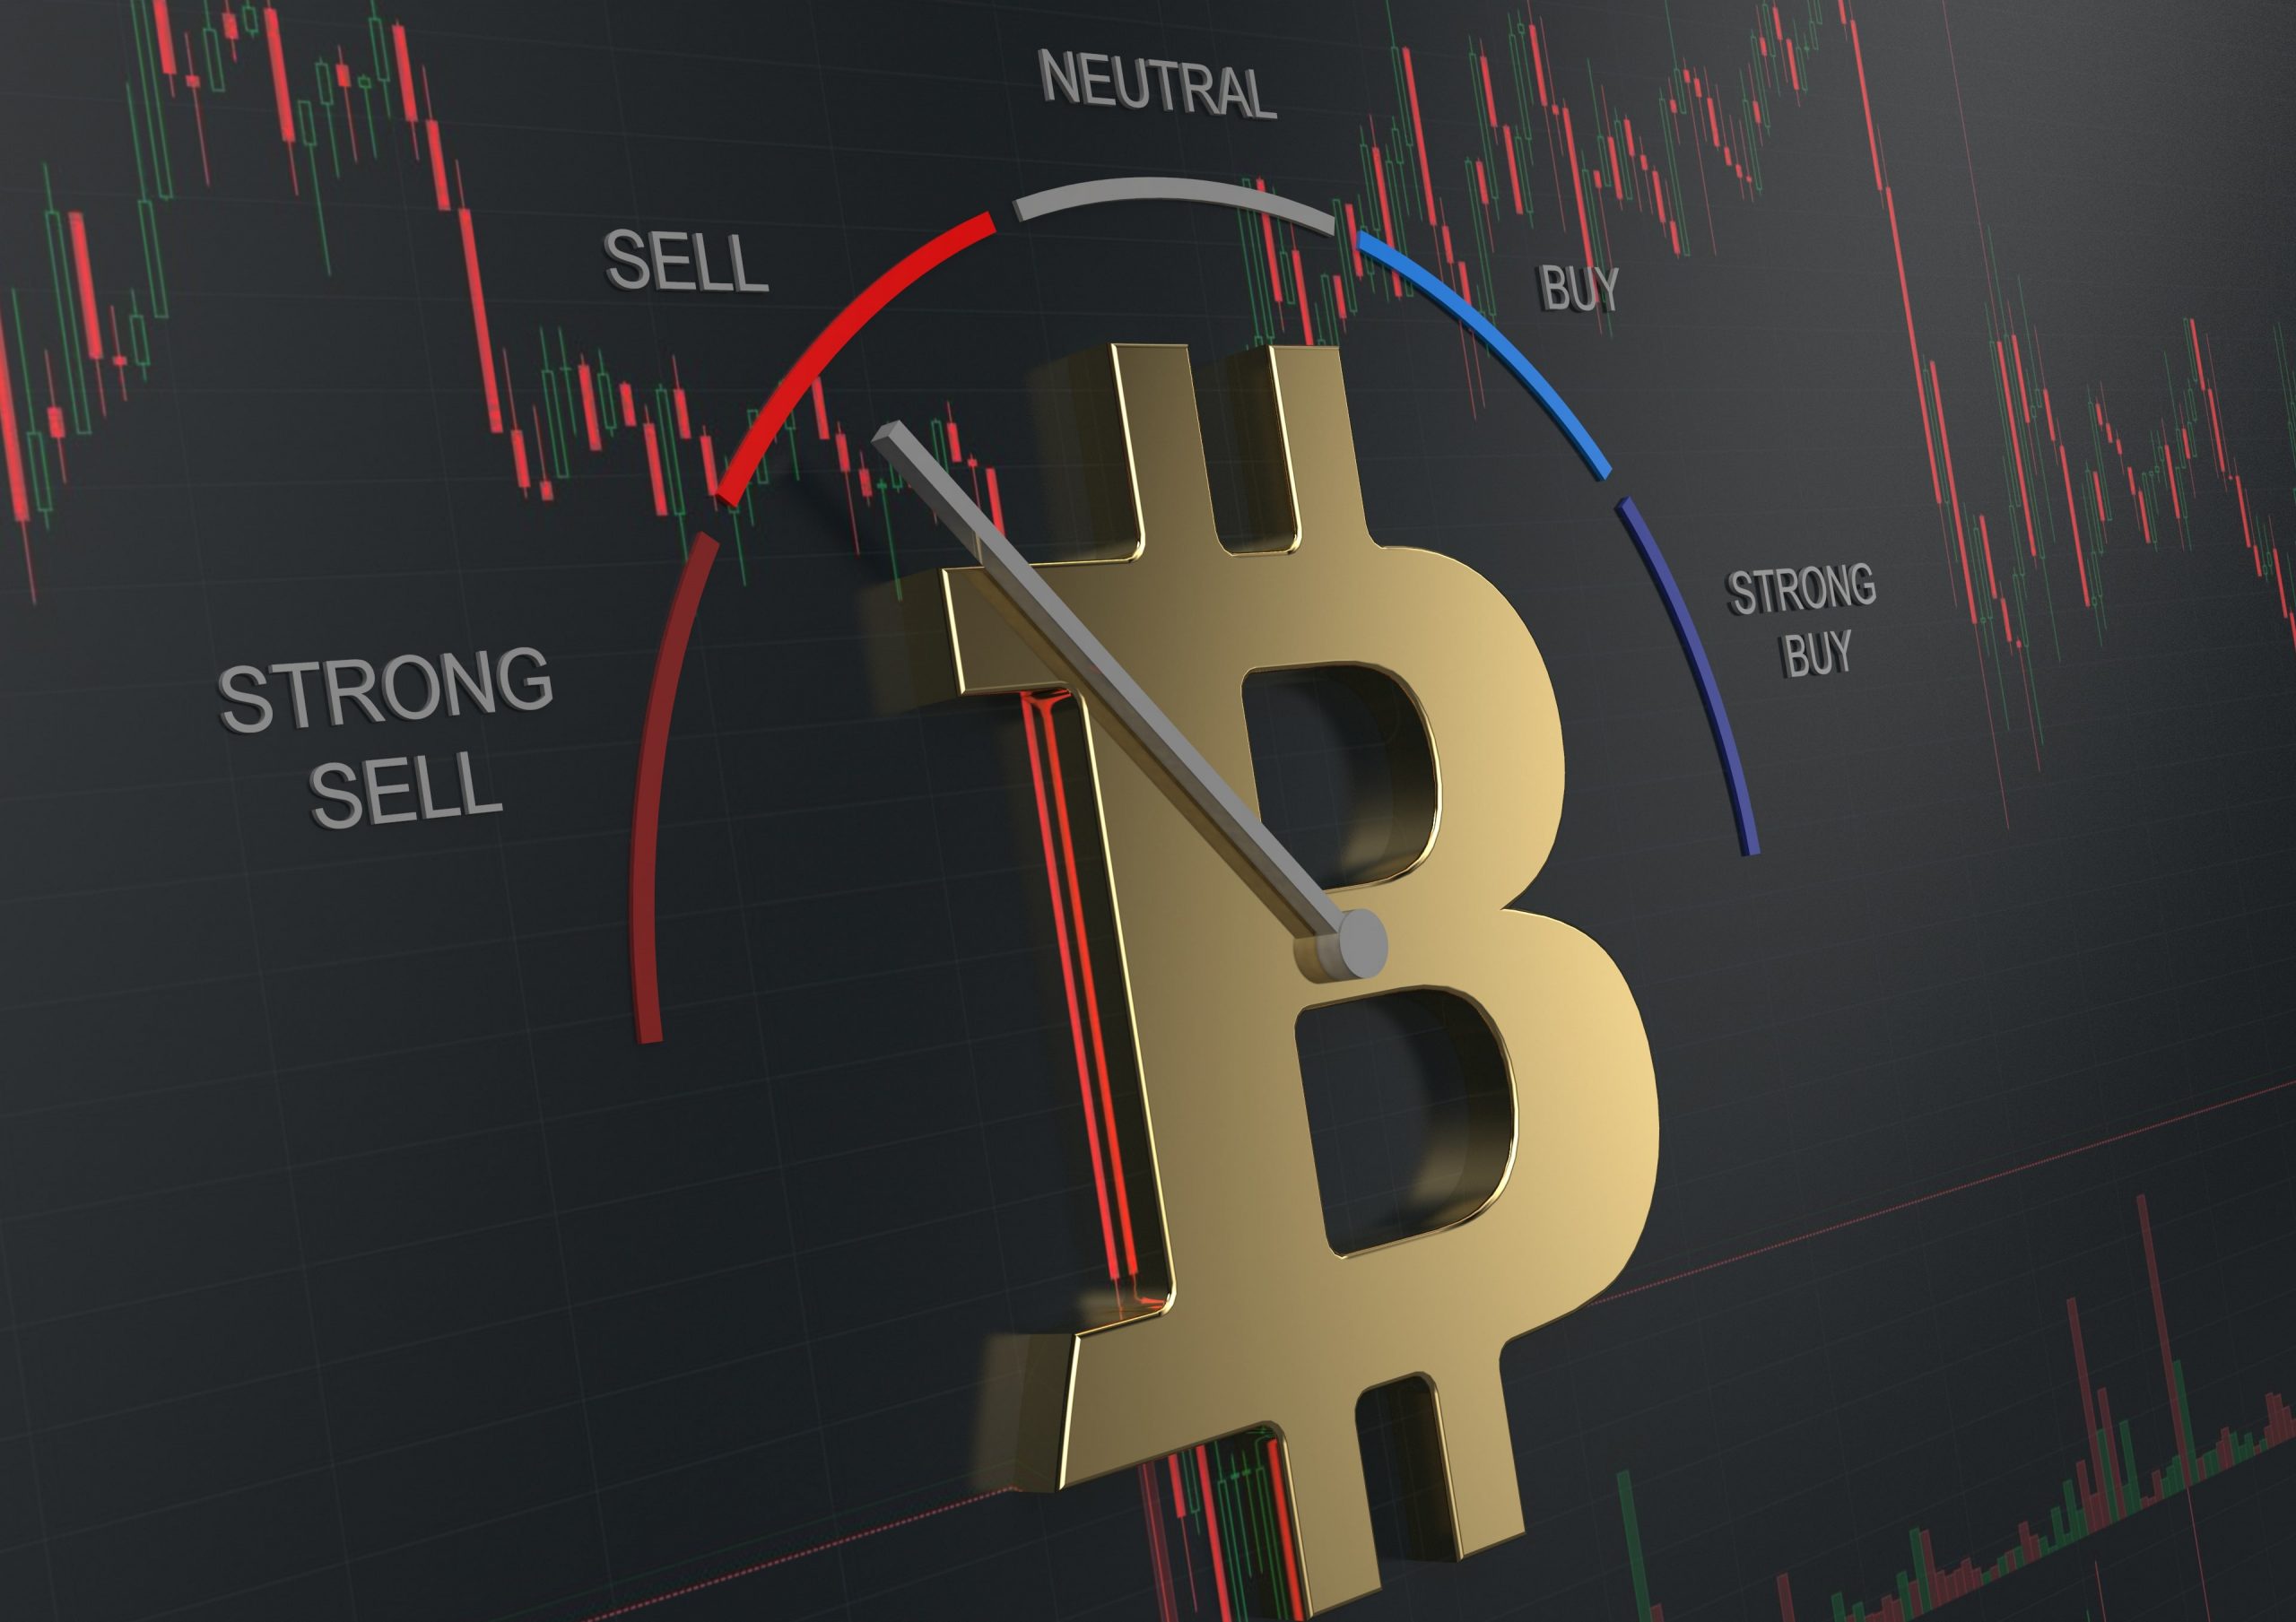 Bitcoin Hits $50K Again as Market Sentiment Enters “Greed” Mode